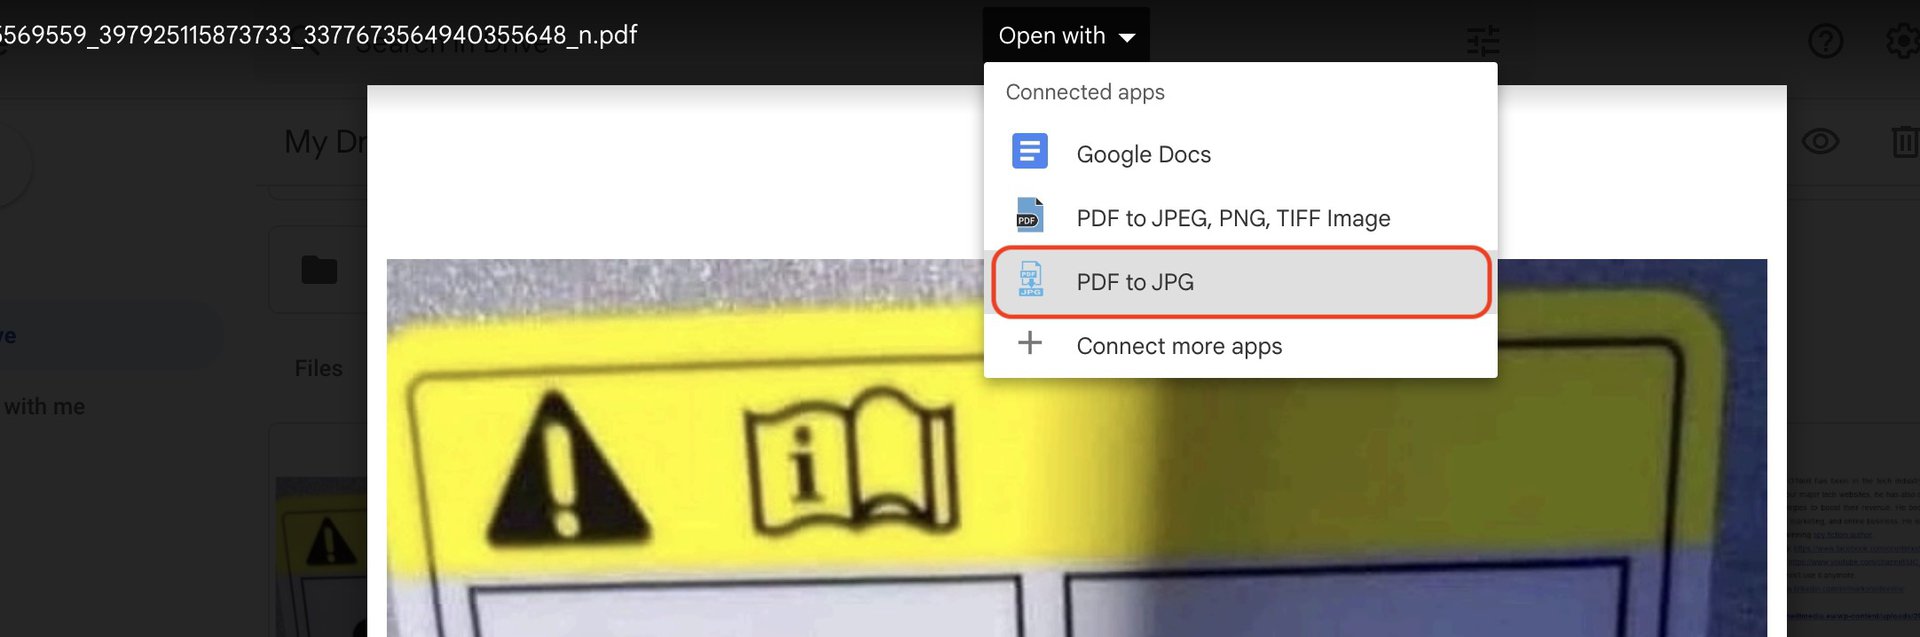 google drive open with menu